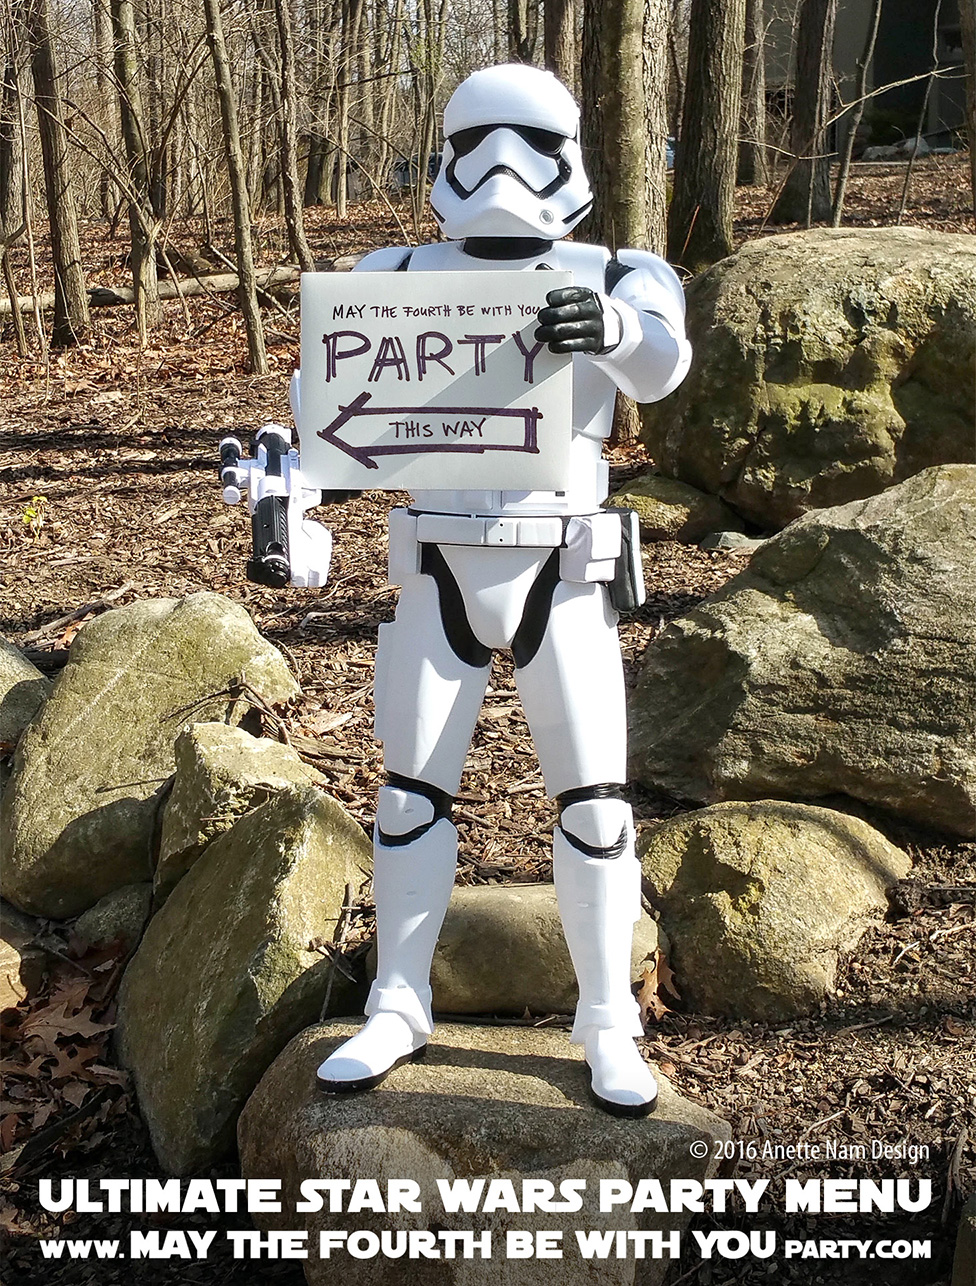 https://maythefourthbewithyouparty.files.wordpress.com/2016/04/may-the-fourth-party-menu-strormtrooper.jpg